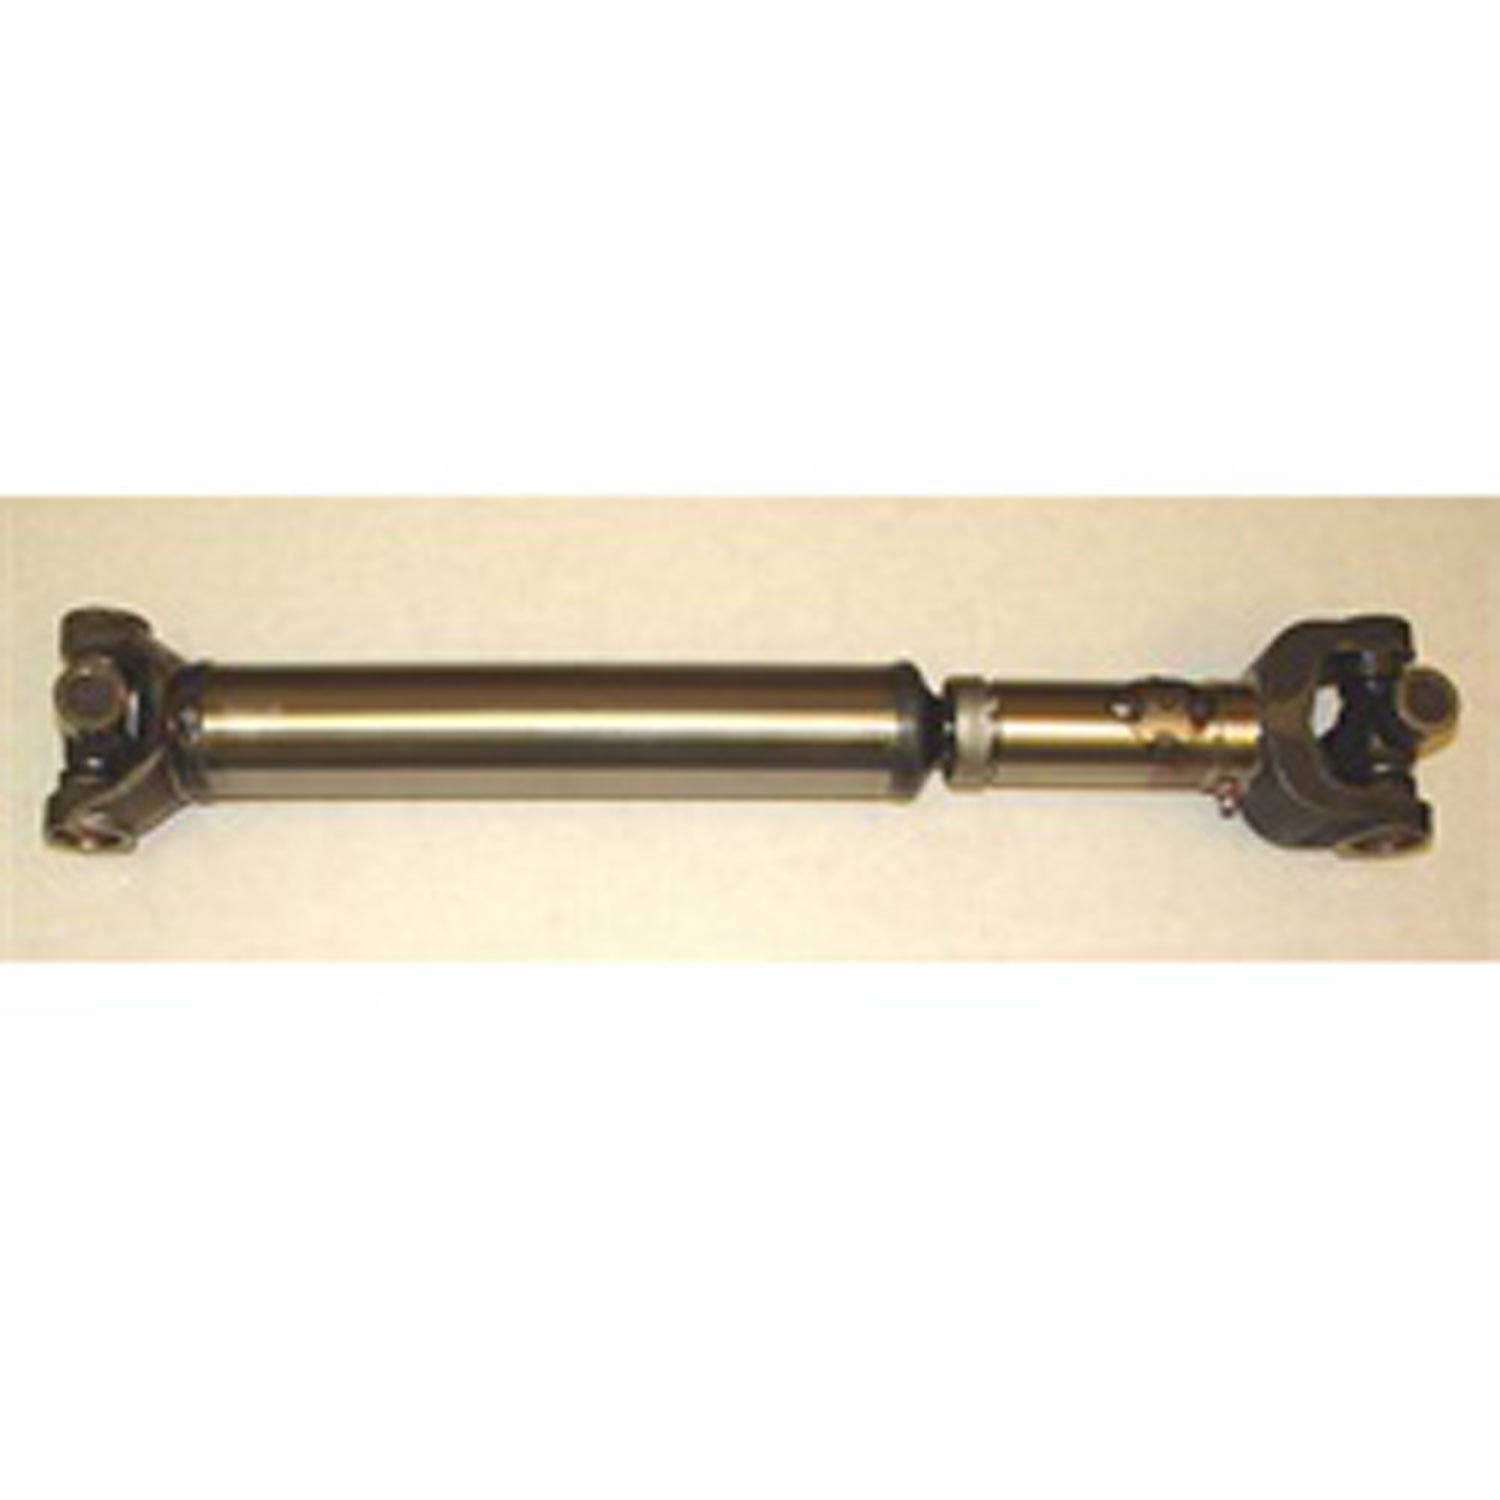 Stock replacement rear driveshaft from Omix-ADA, Fits 81-86 Jeep CJ7 with 6 or 8-cylinder engine